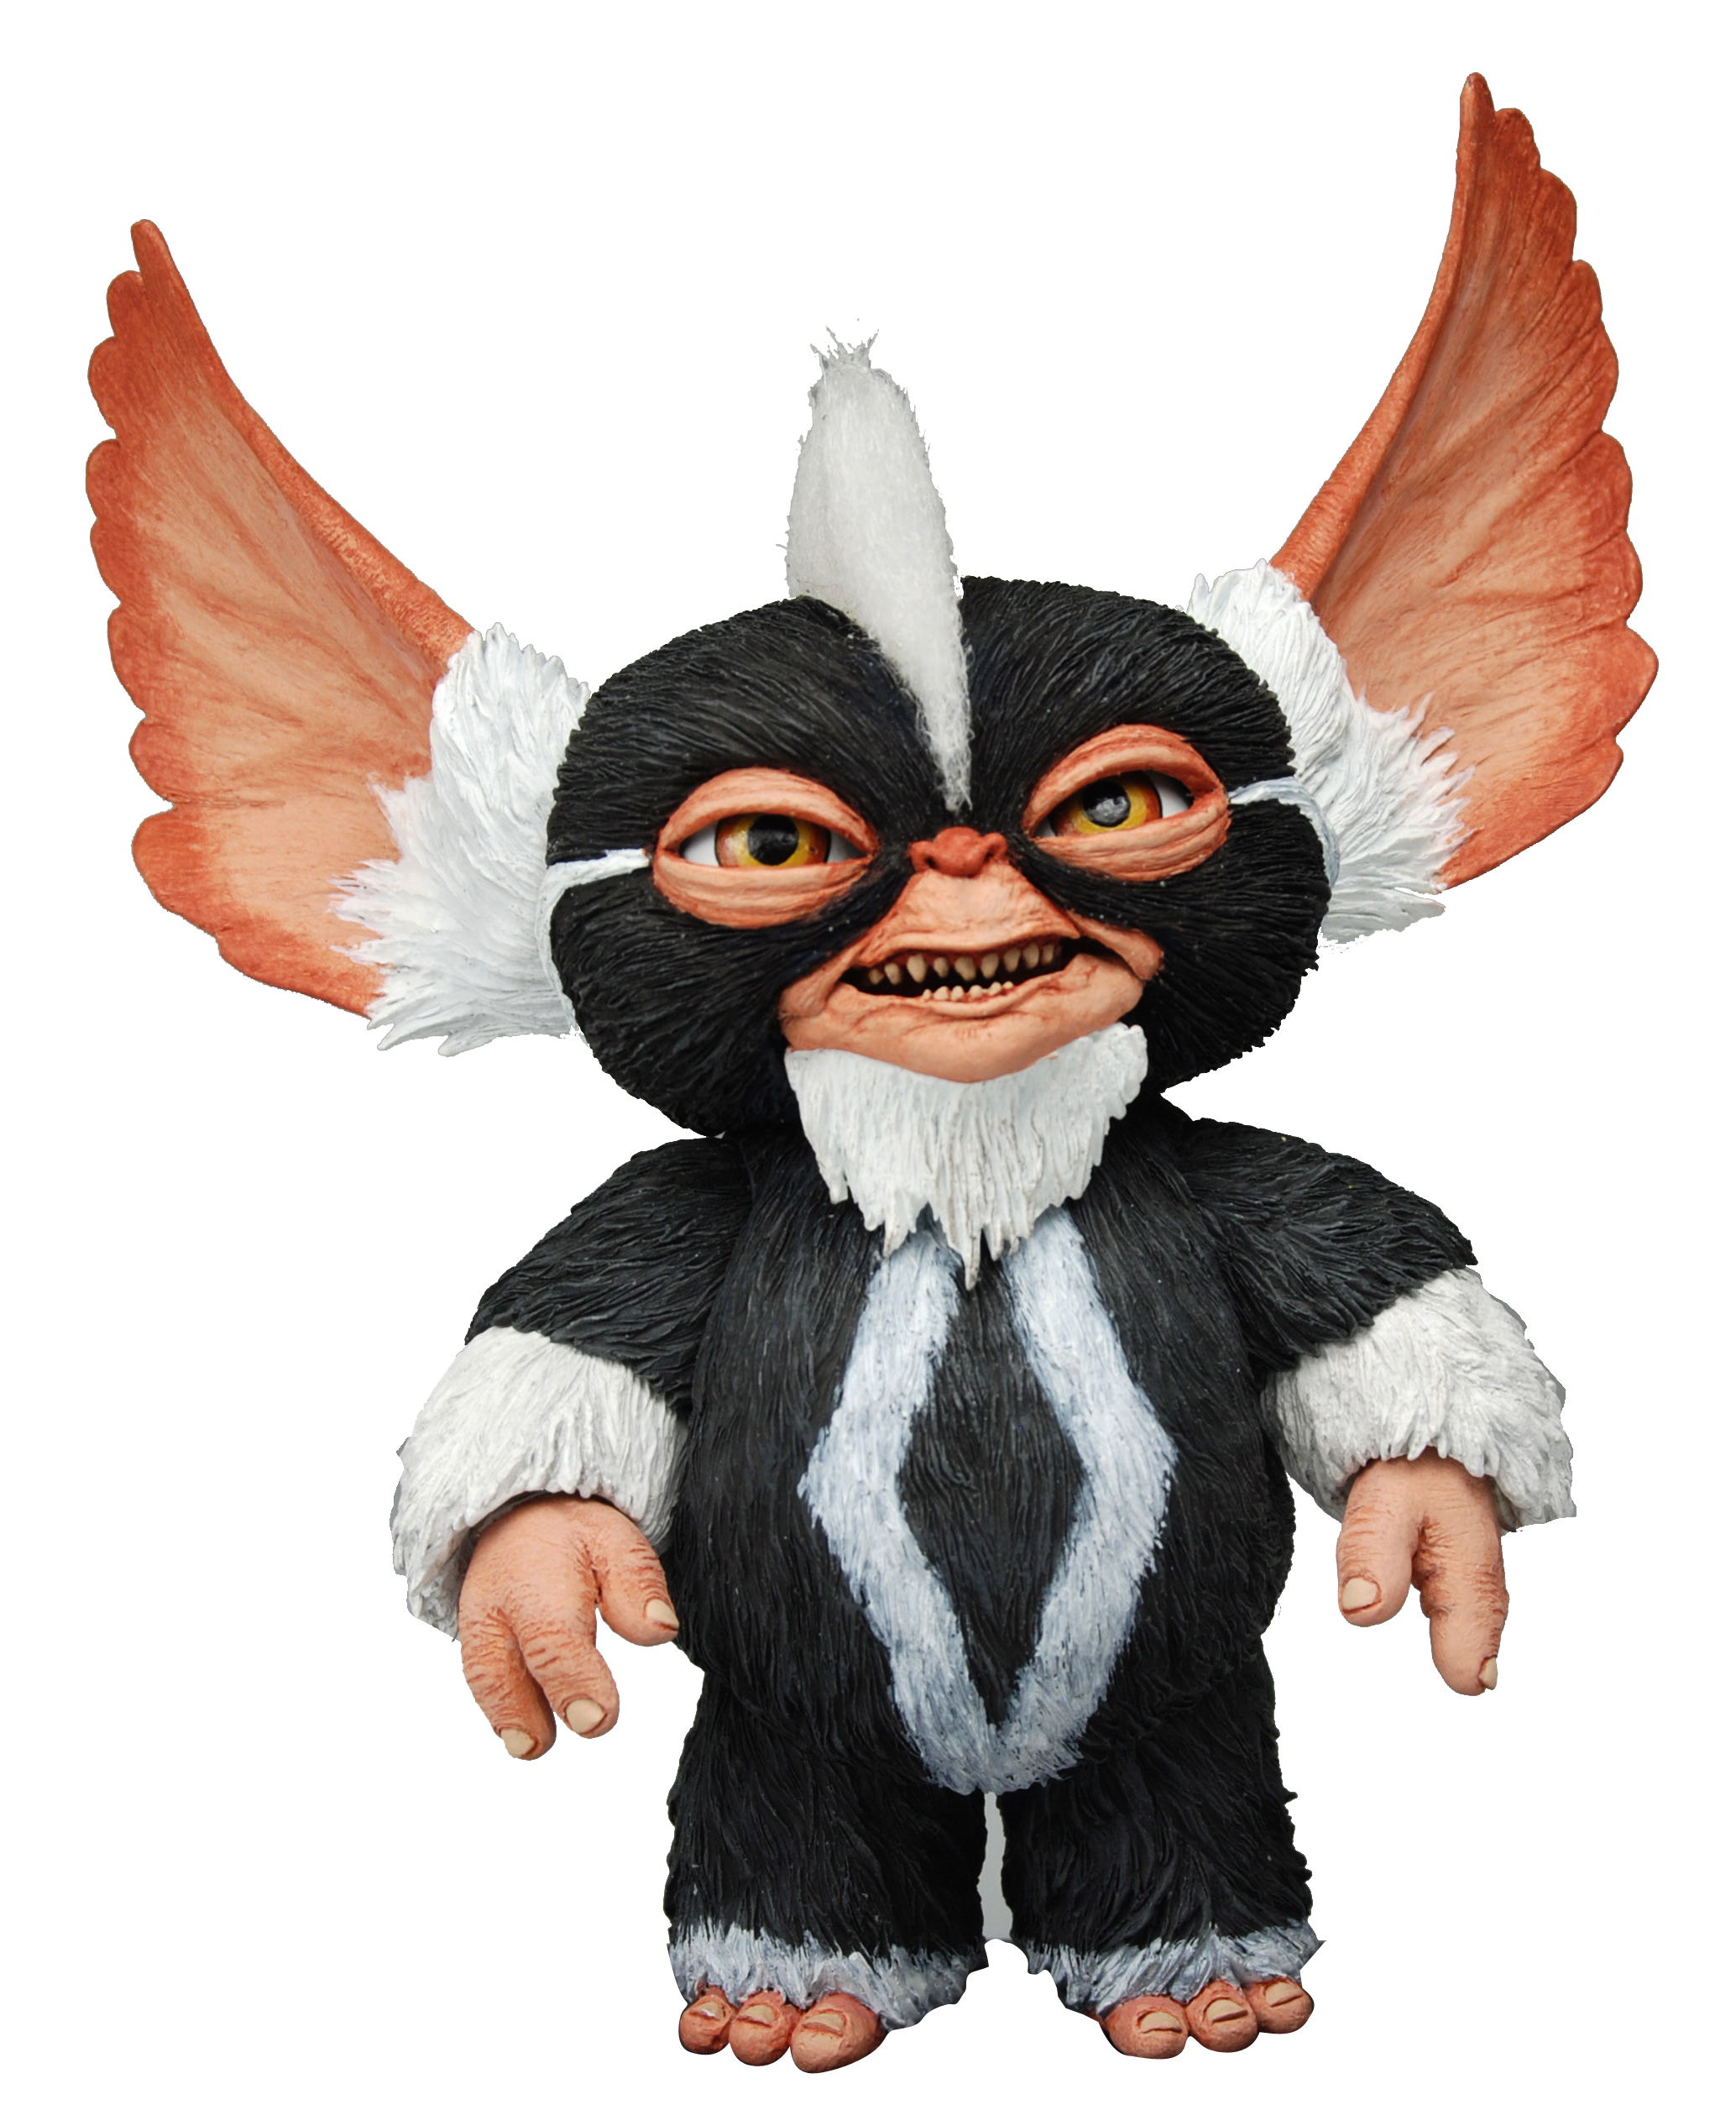 Gremlins 2: The New Batch - Mohawk 7" Action Figure